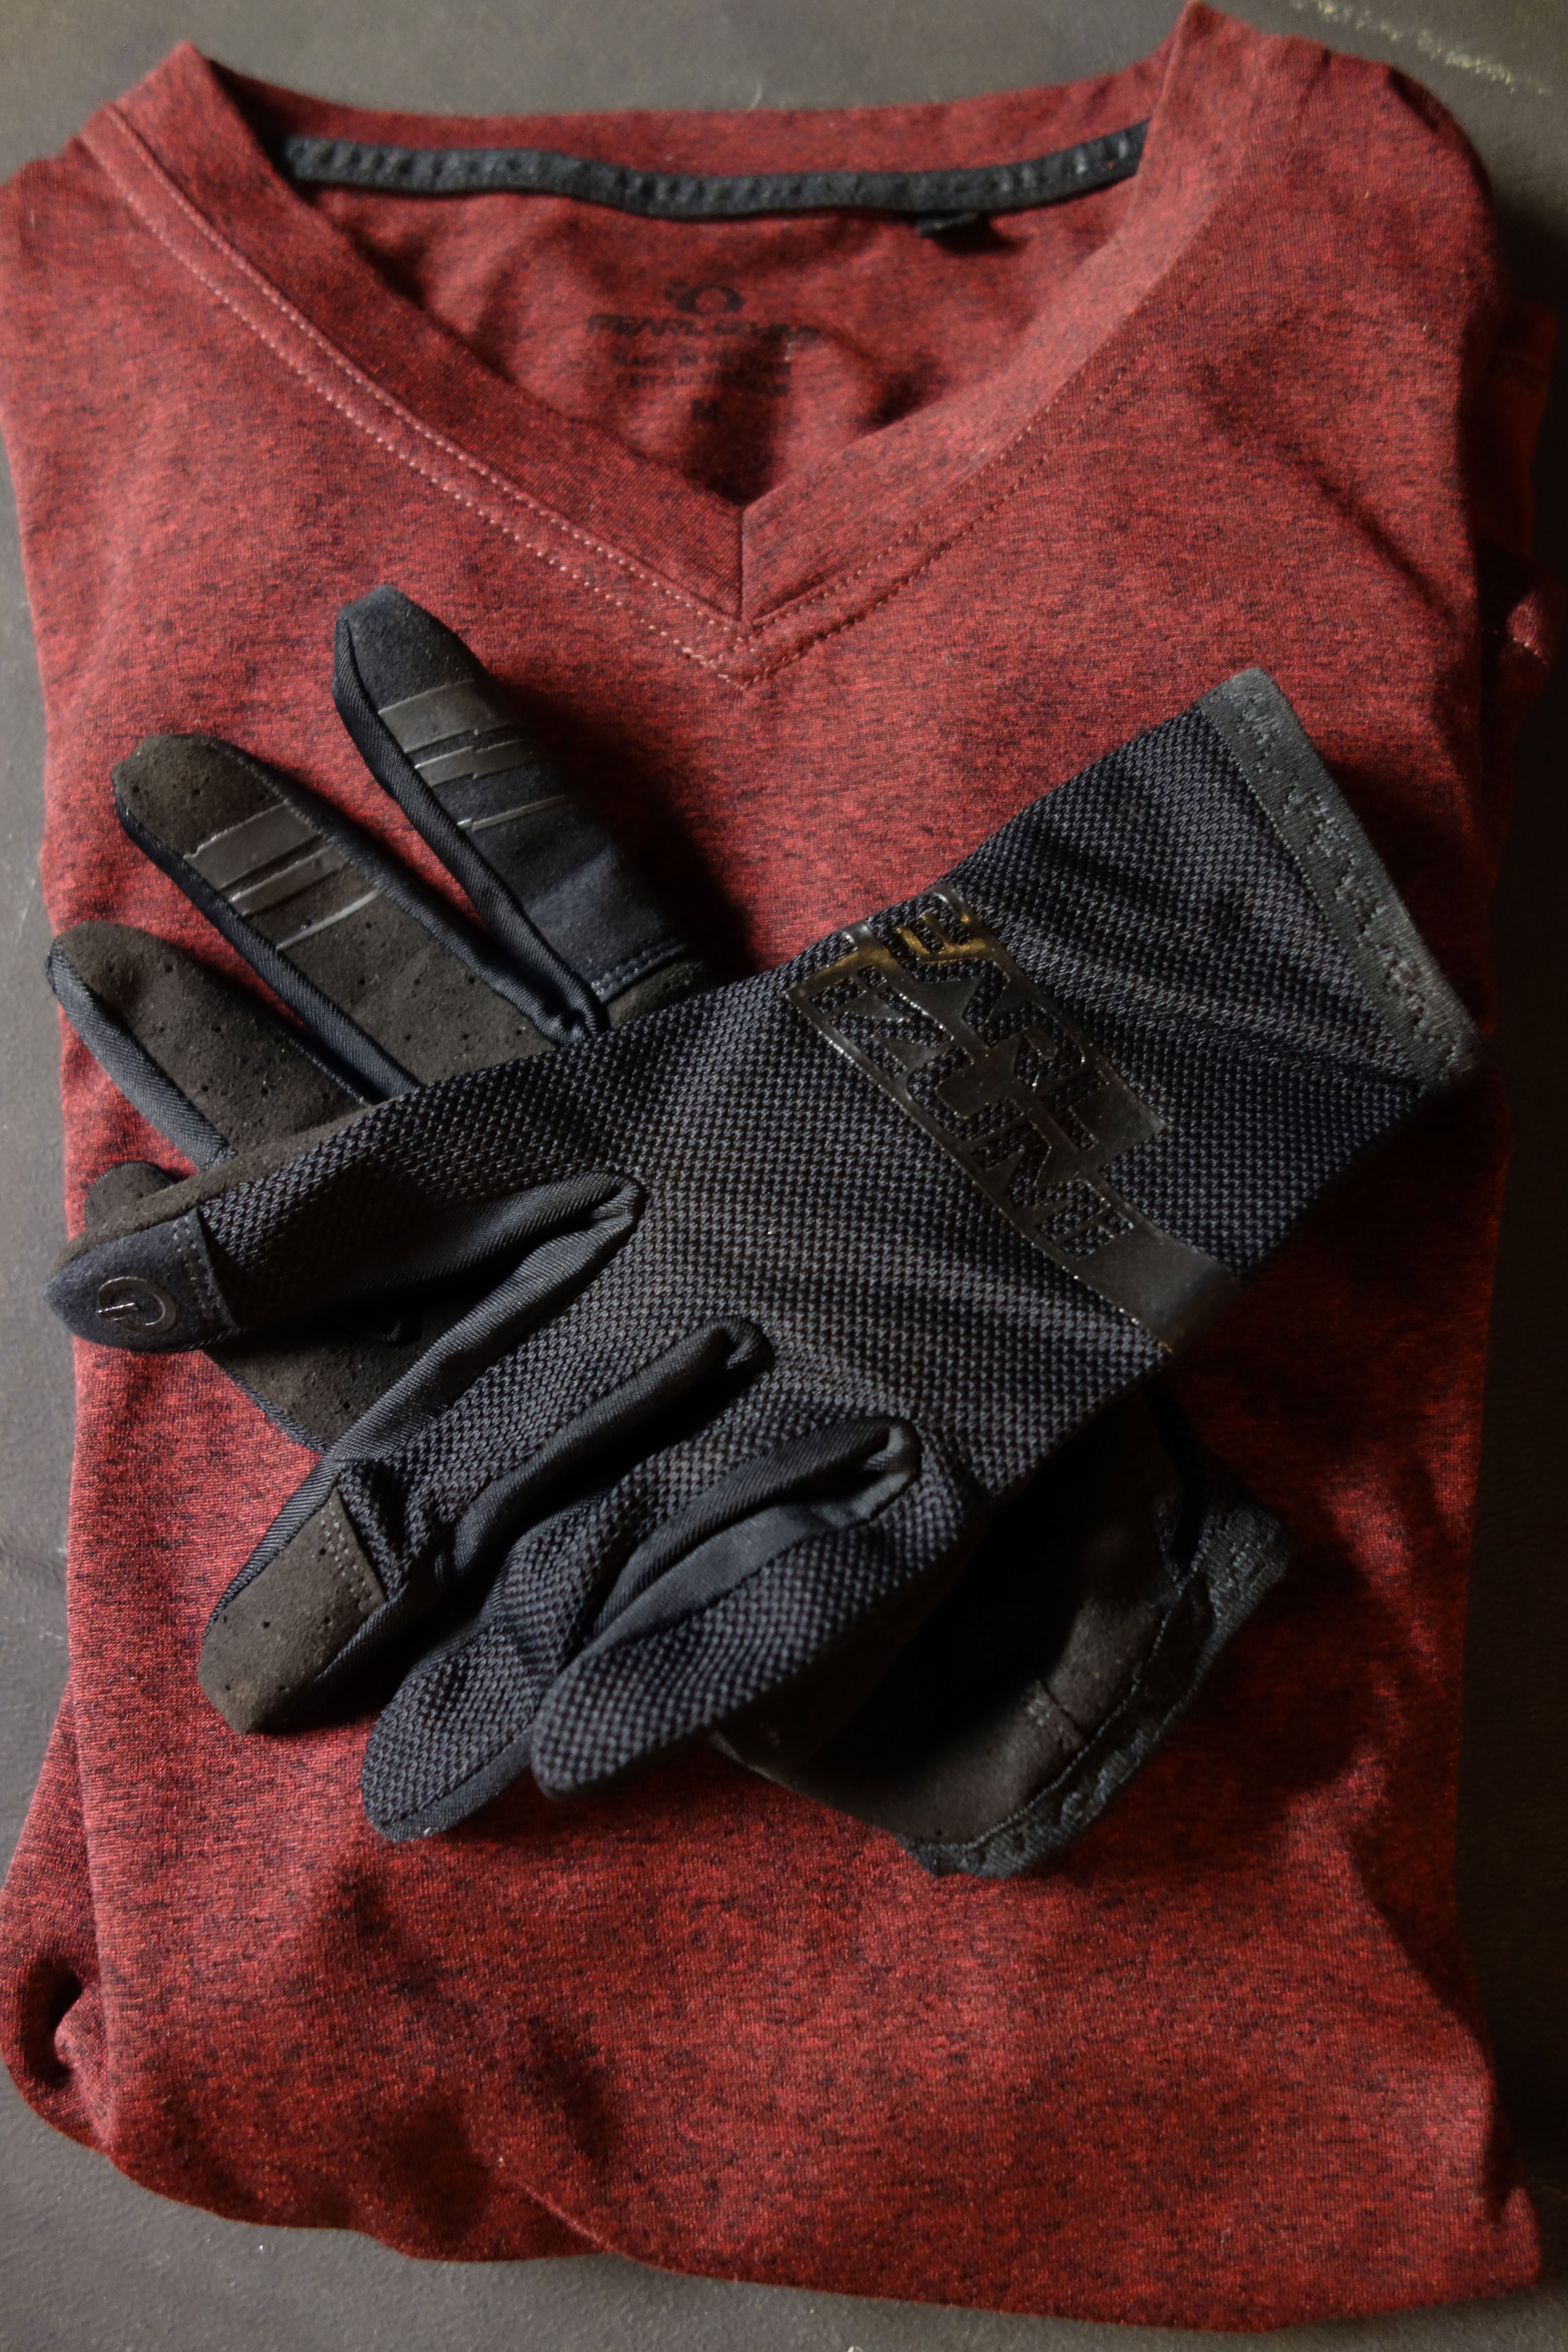 Pearl Izumi MTB gear featuring the Divide Glove and Performance T.